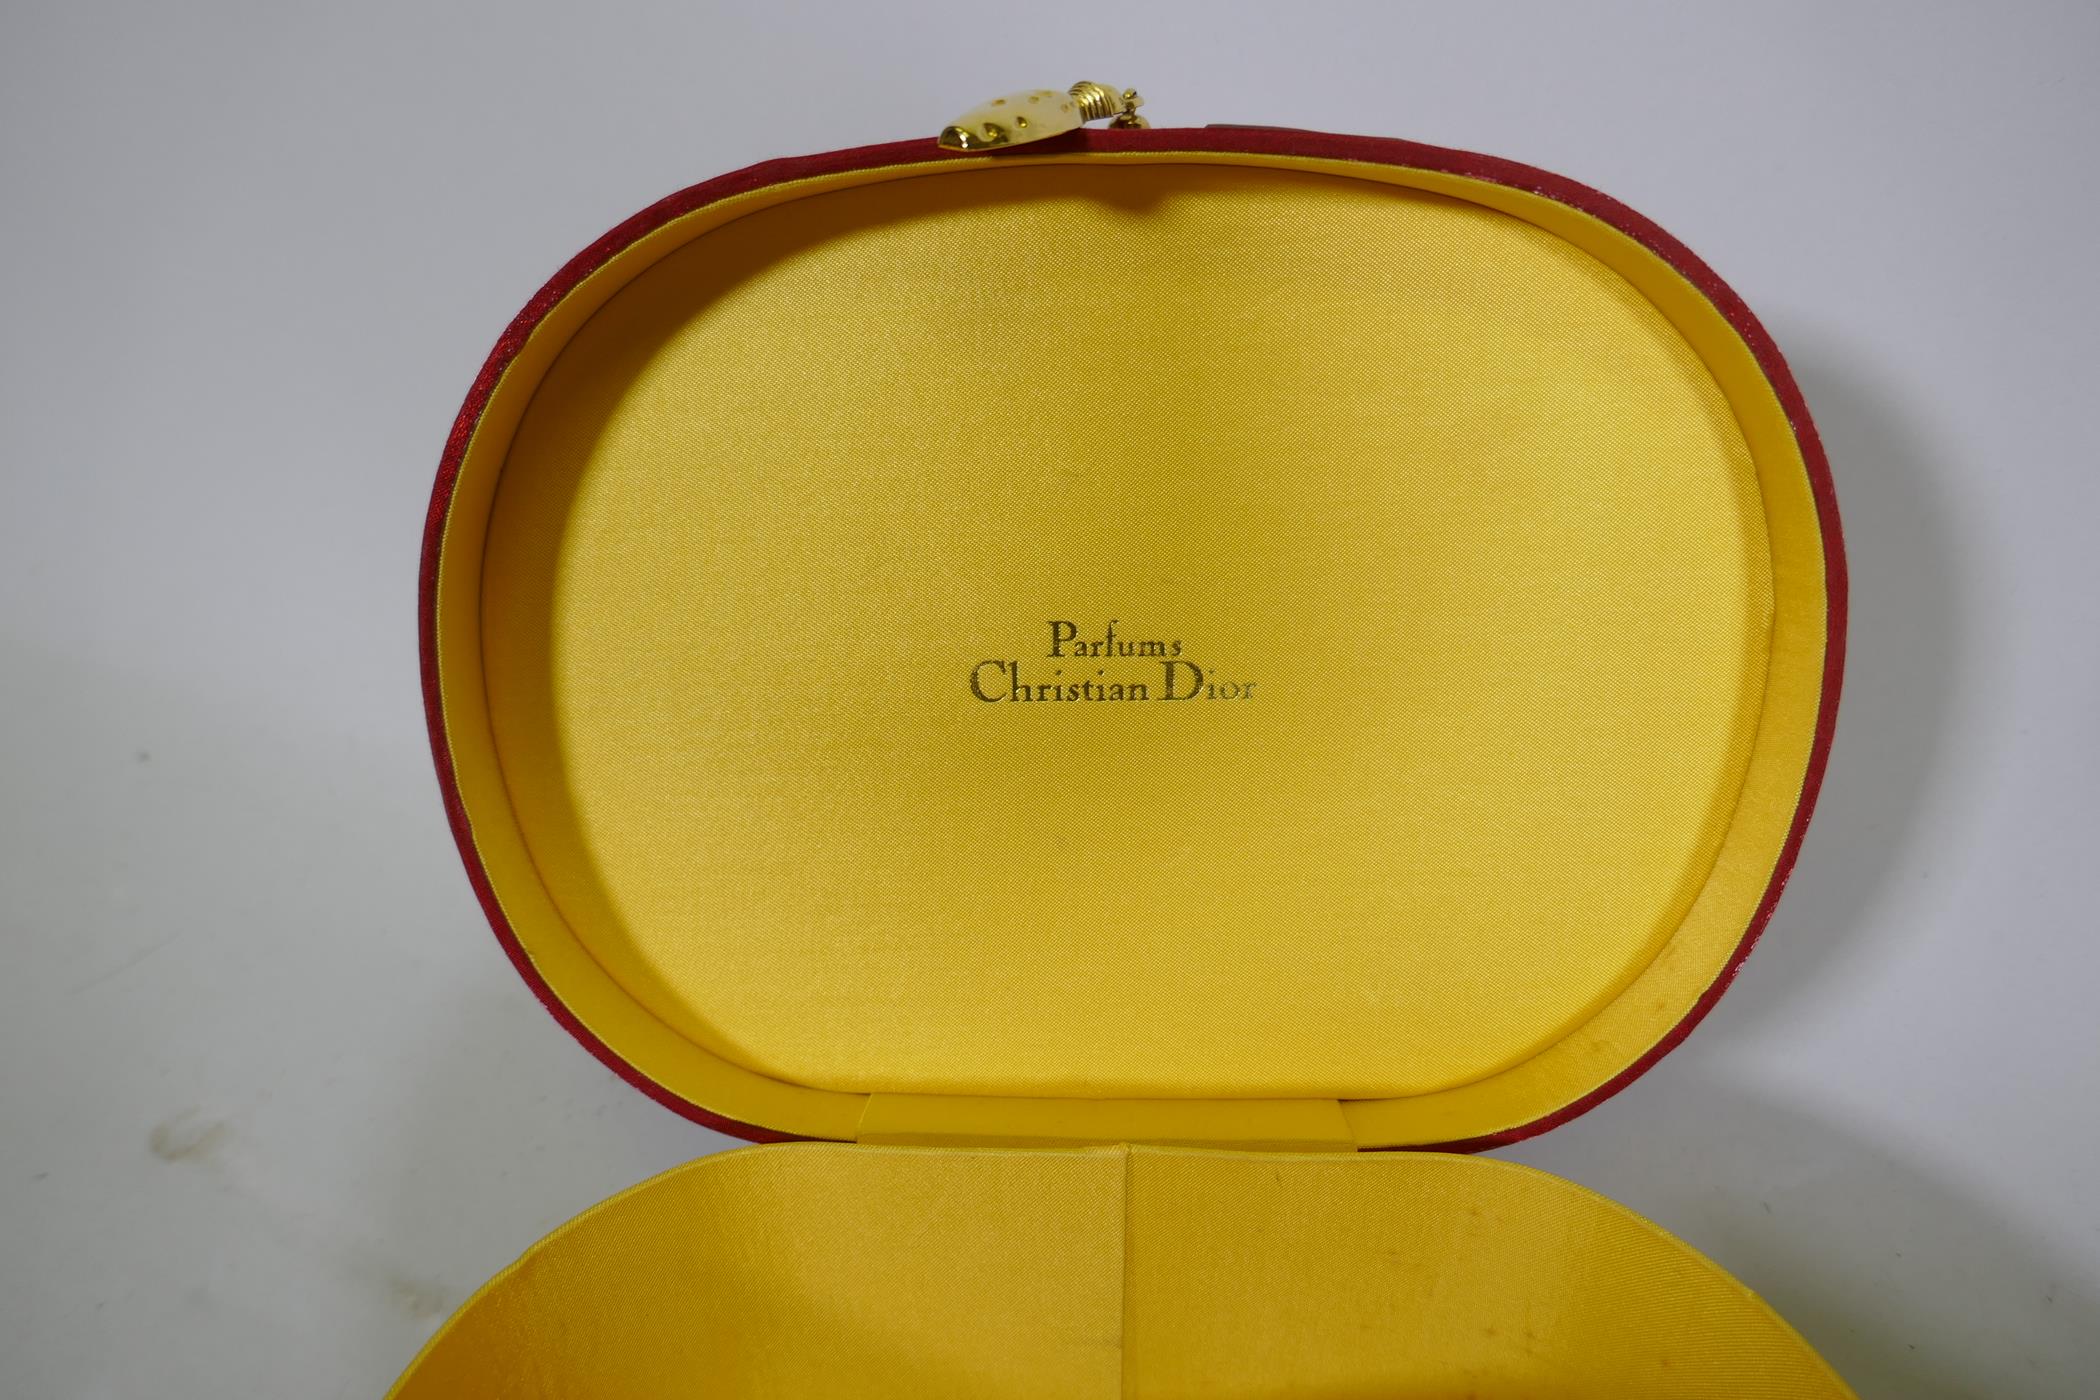 A quantity of costume jewellery in a Christian Dior presentation box, 21 x 16 x 11cm - Image 2 of 3